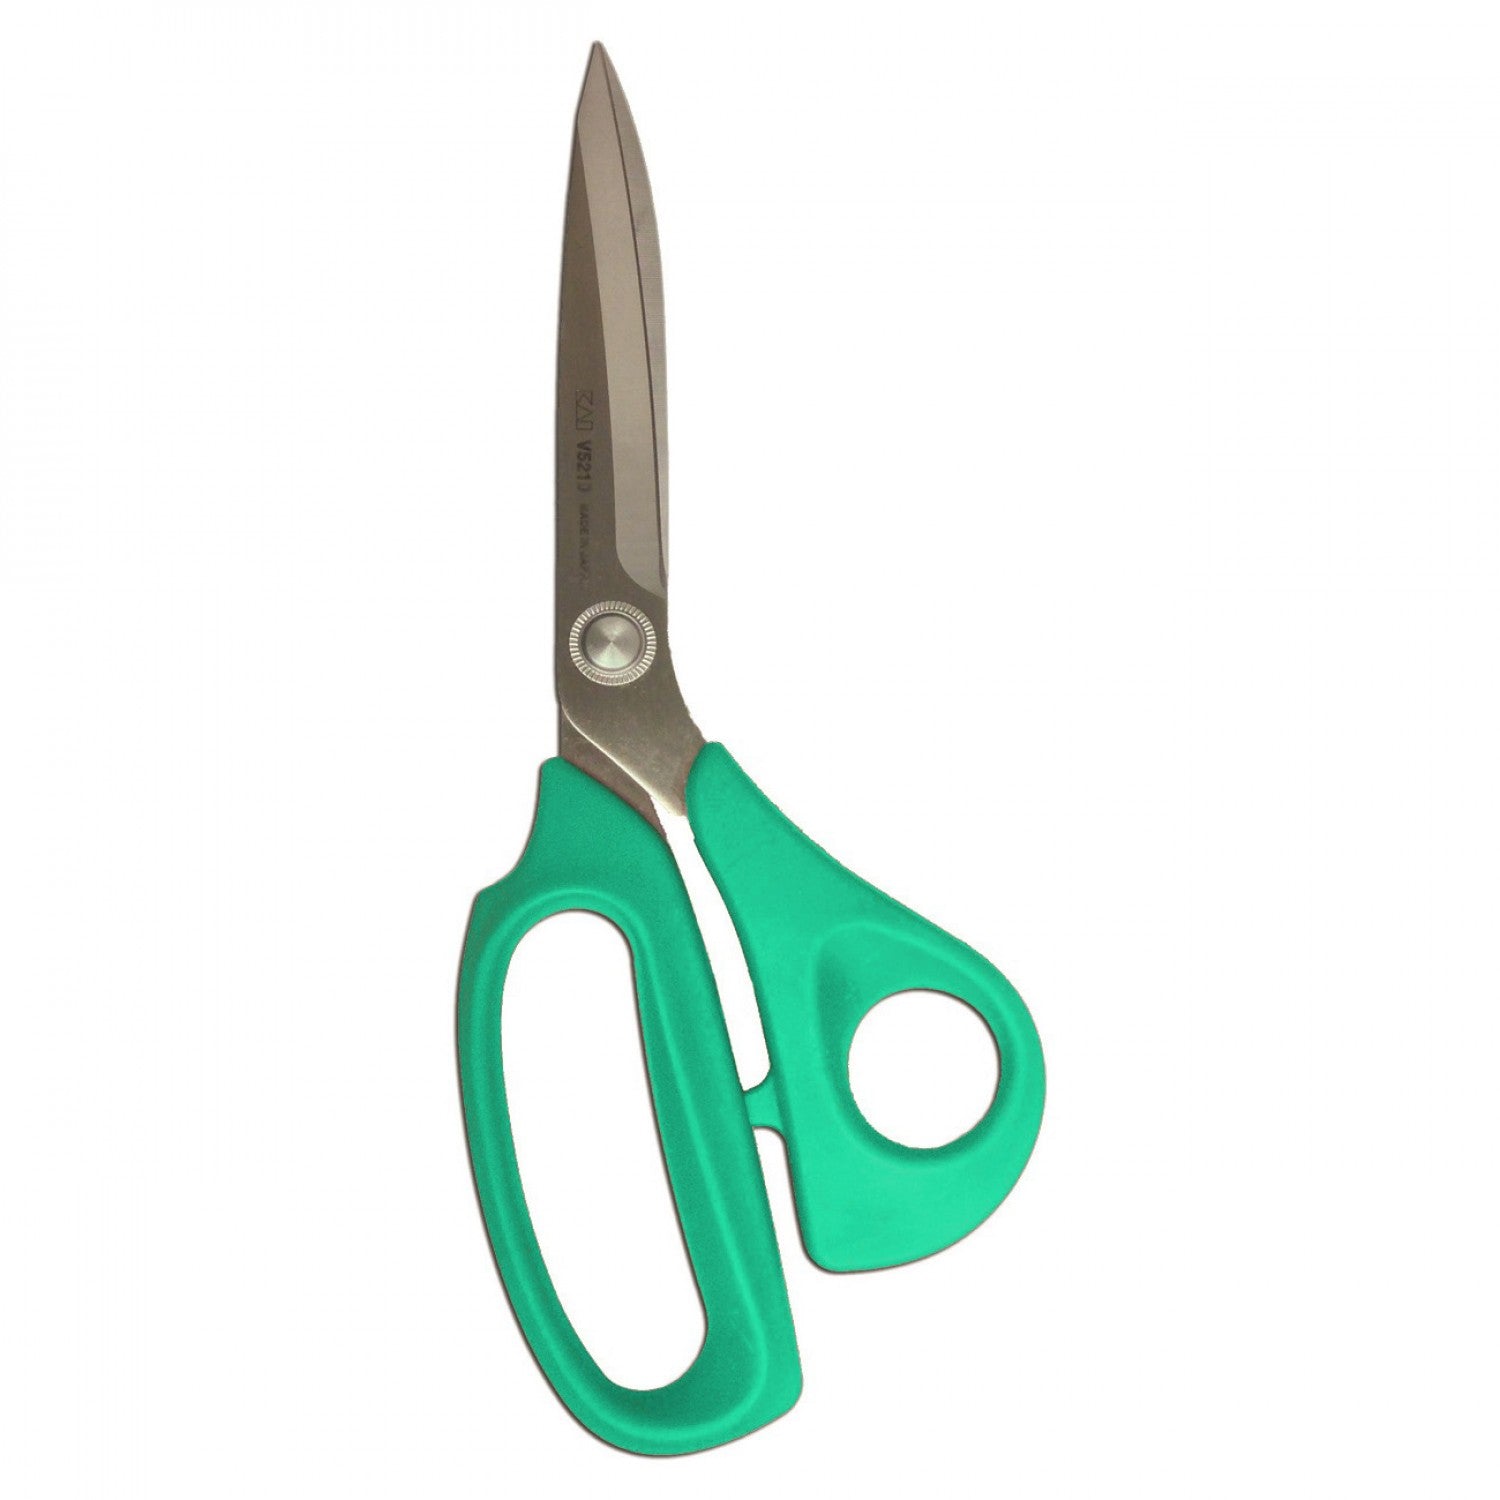 The Best Sewing Shears and Scissors in 2020